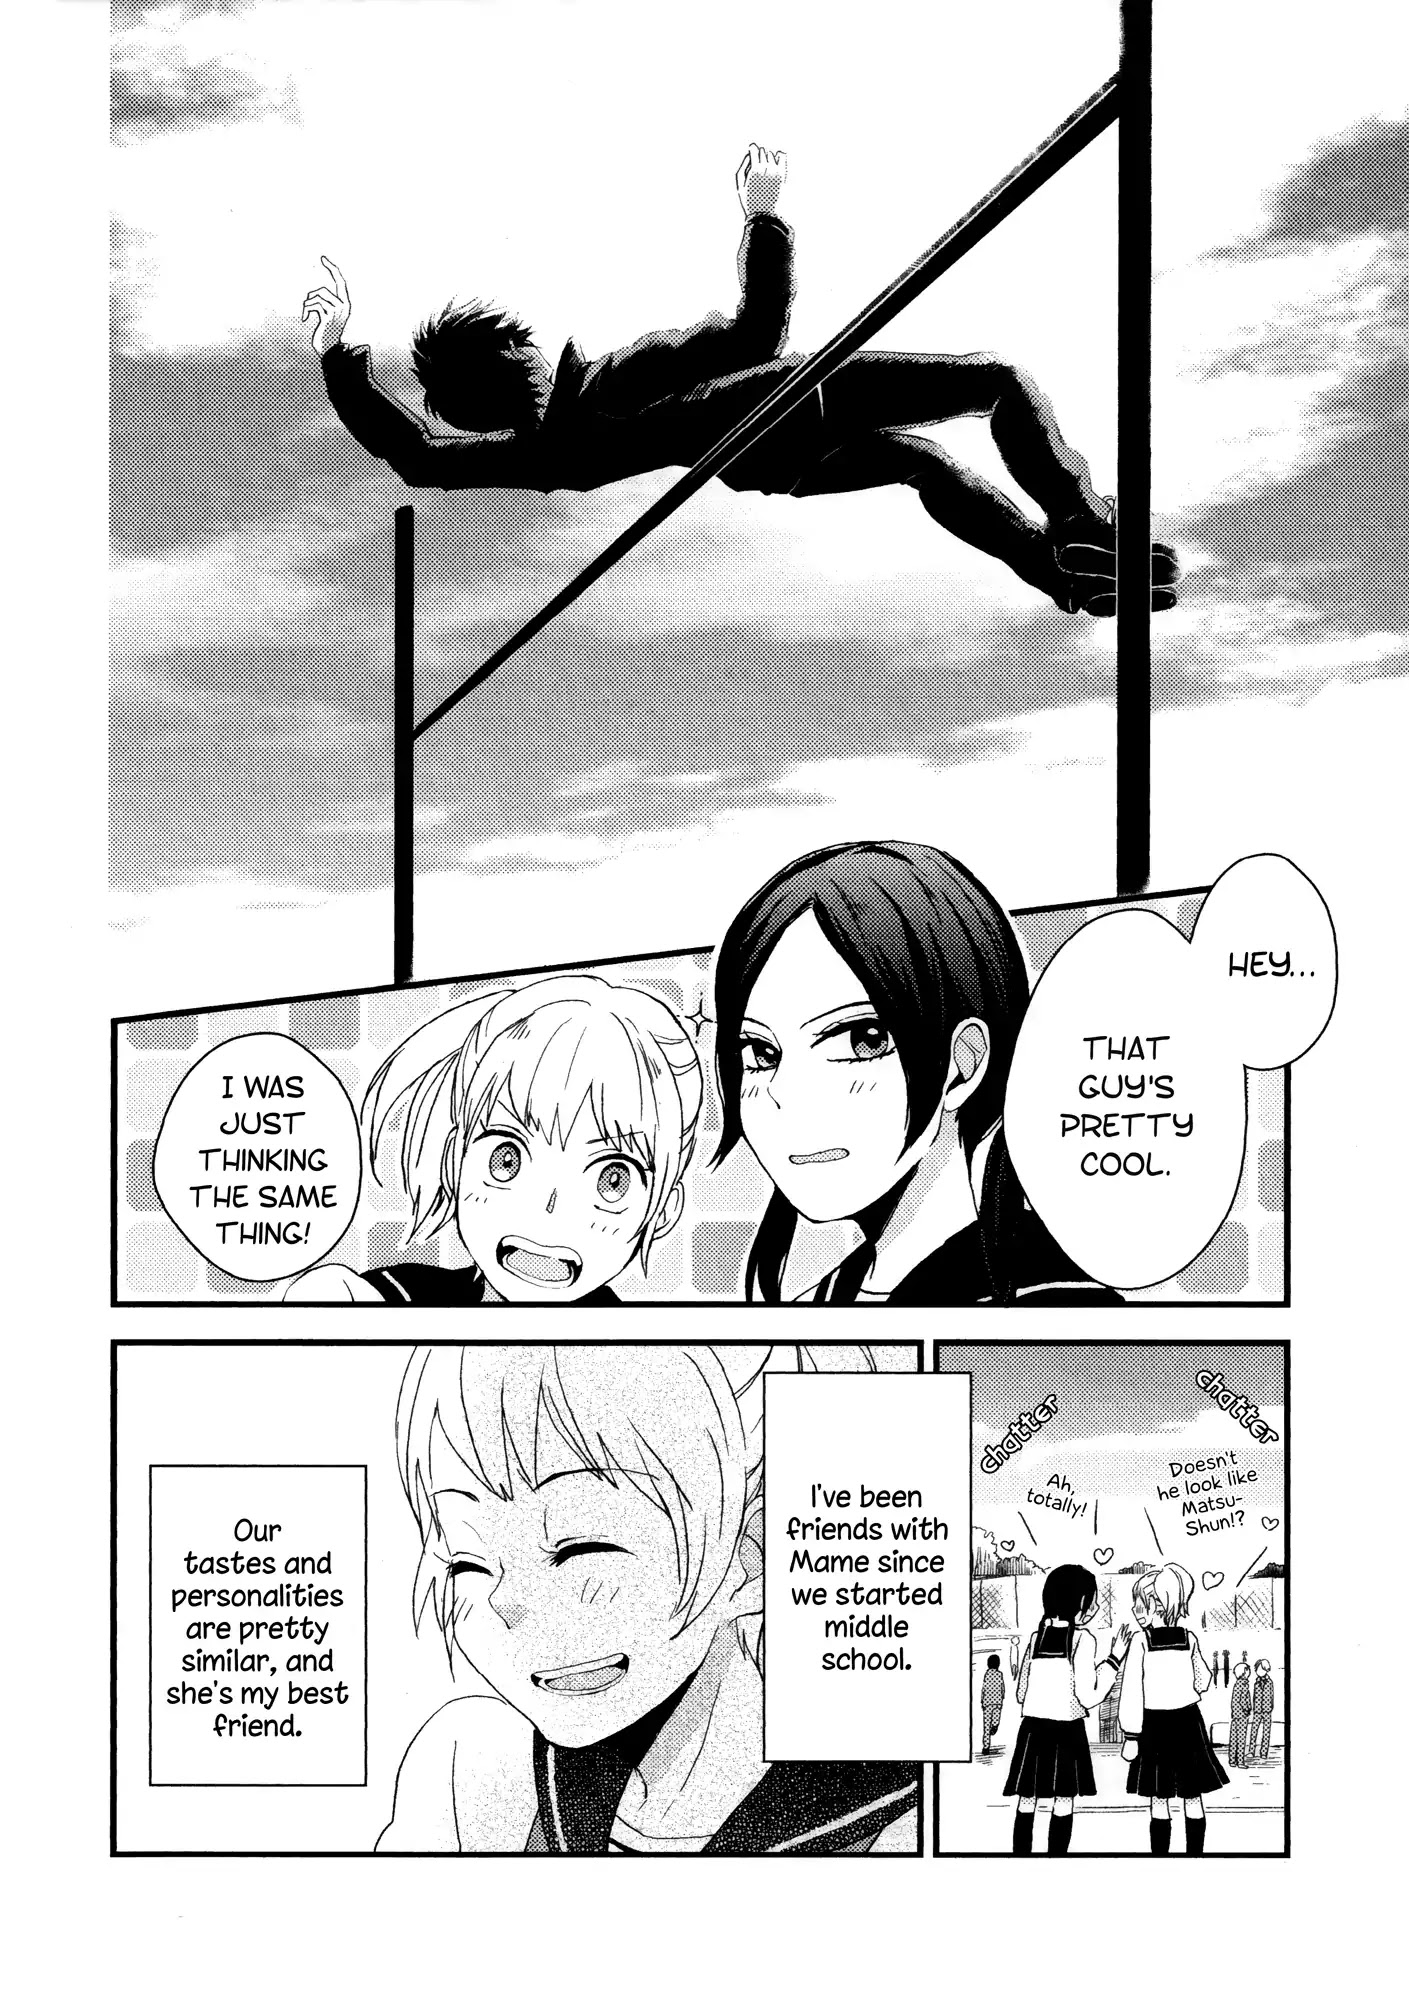 Houkago! (Anthology) Vol.1 Chapter 19: One Two Step (Chizu Kohashi) - Picture 2